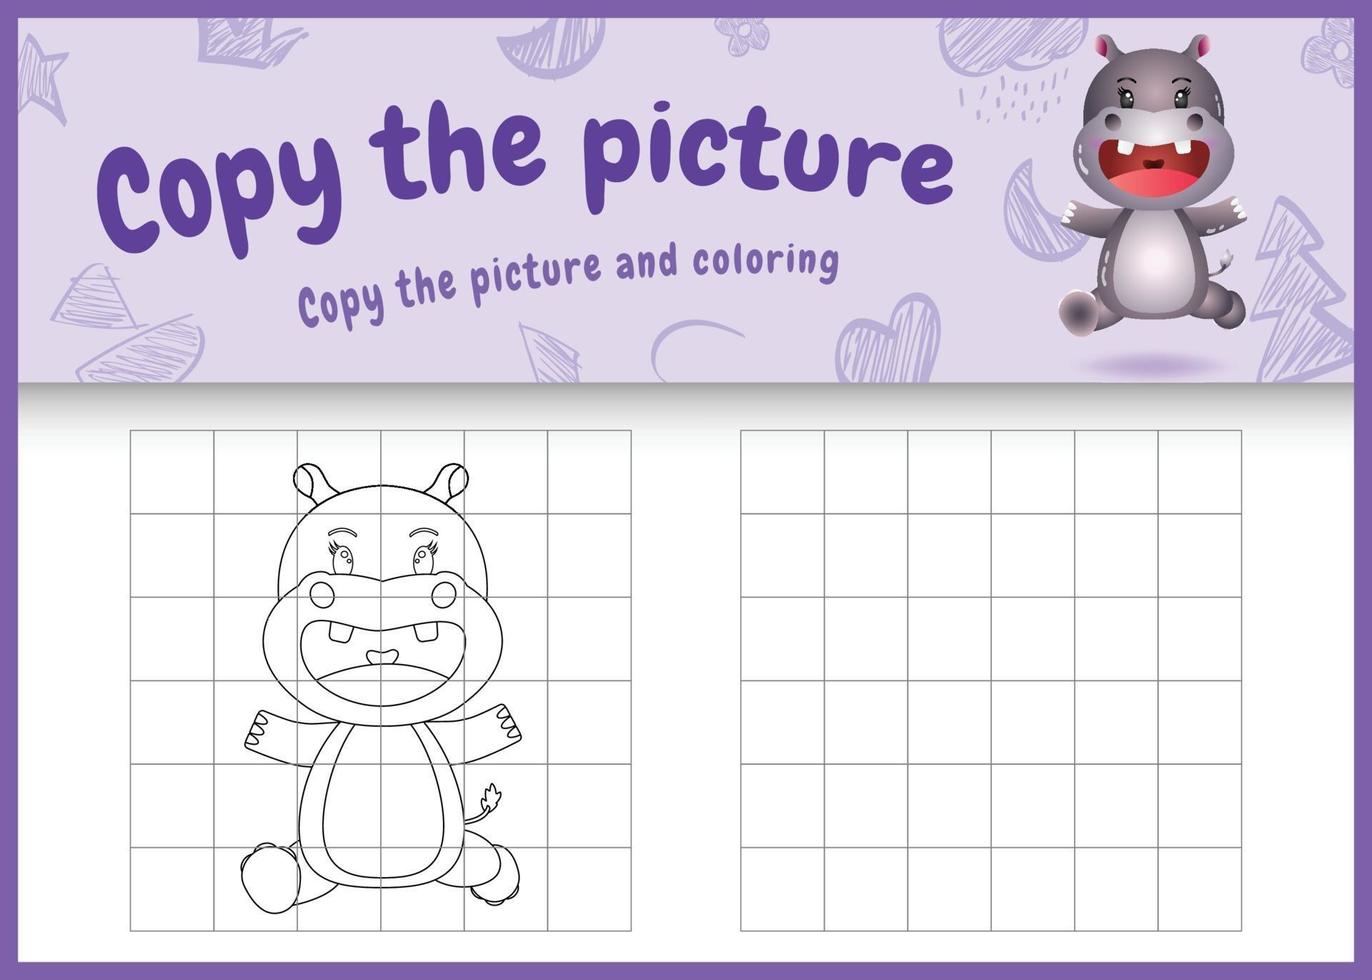 copy the picture kids game and coloring page with a cute hippo character illustration vector